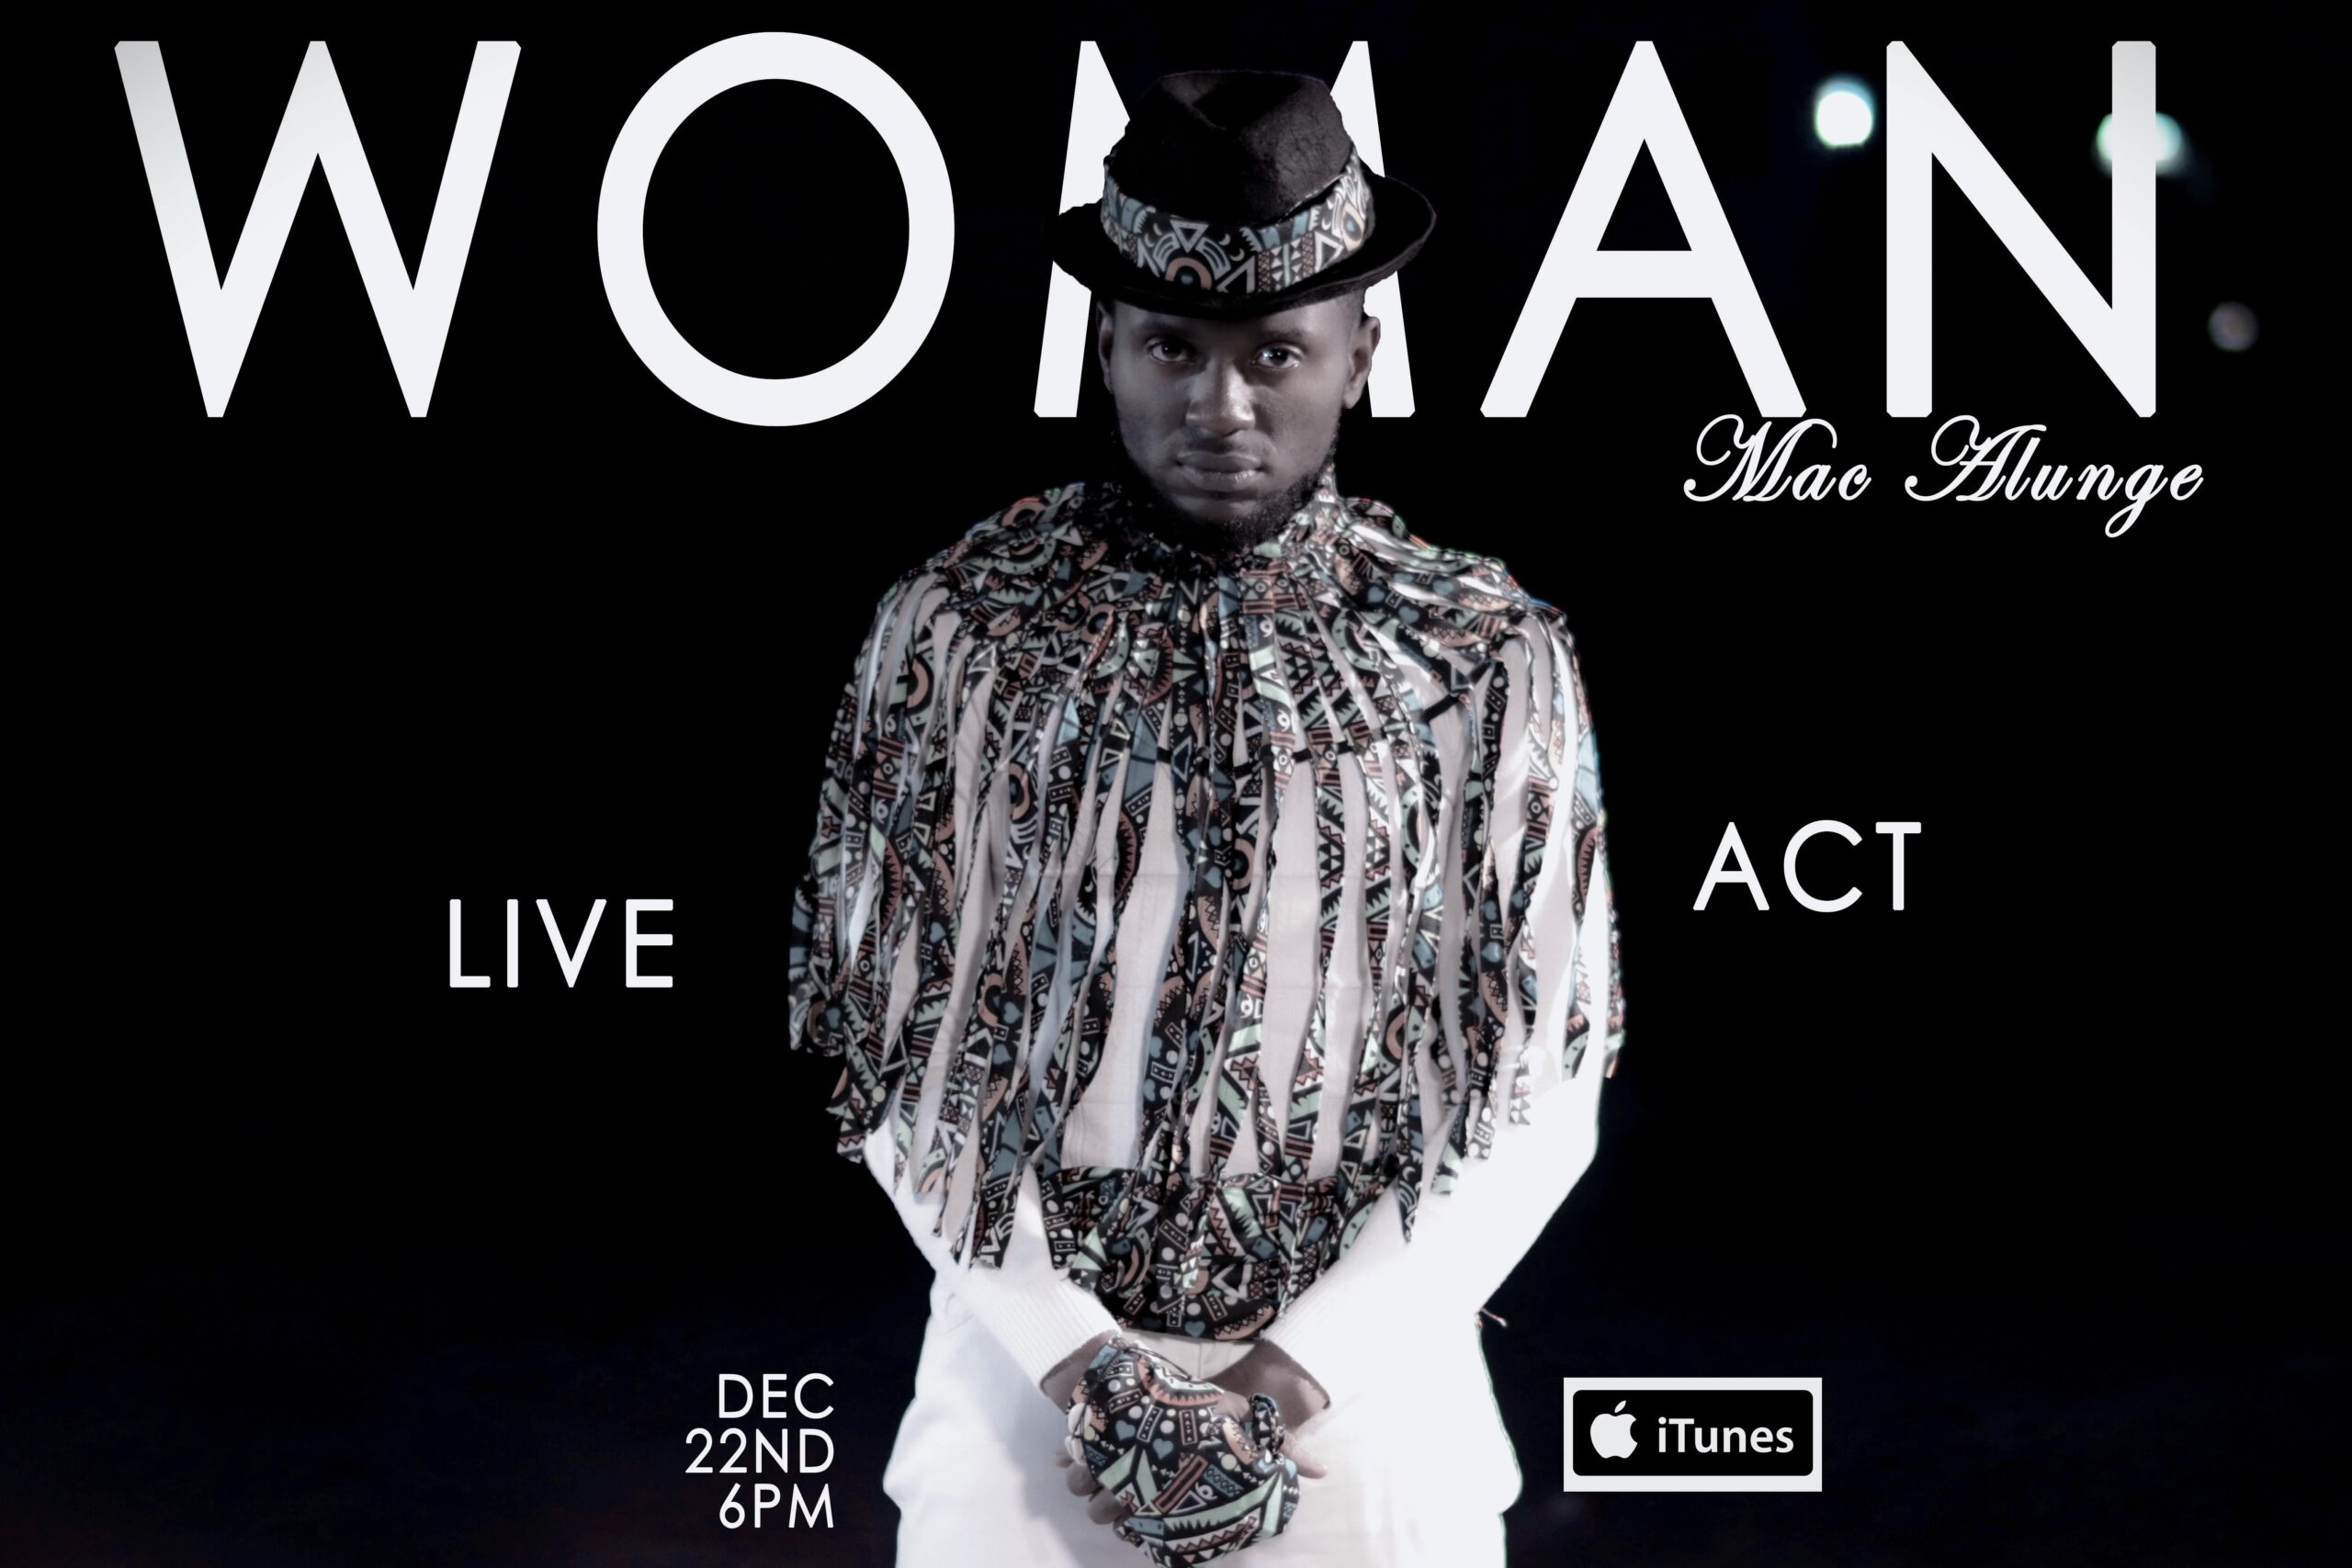 Mac Alunge - Woman, Live Act